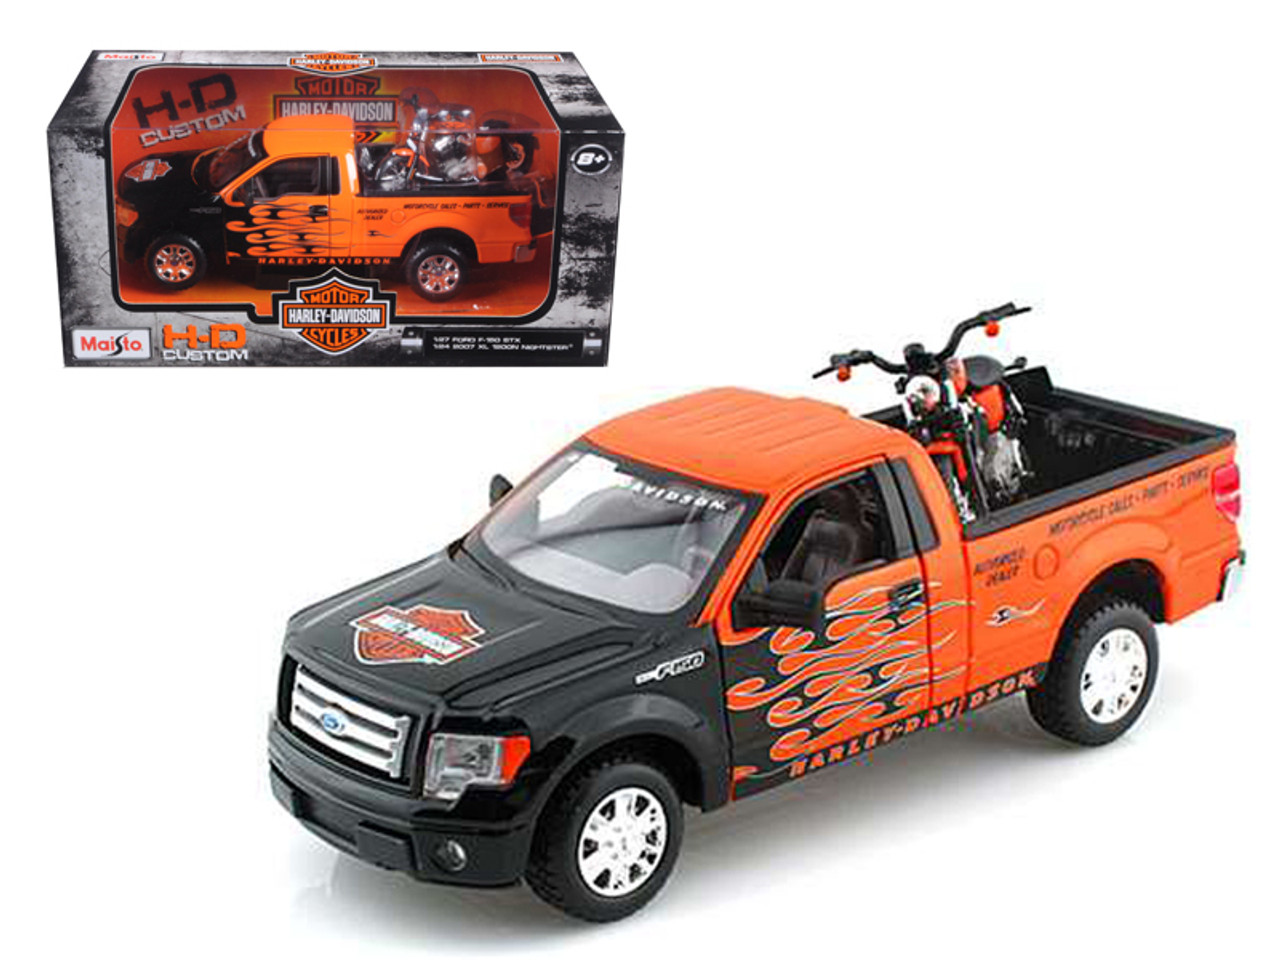 2010 Ford F-150 STX Pickup 1/27 Orange with Flames & 2007 XL1200N Nightster Harley Davidson 1/24 by Maisto